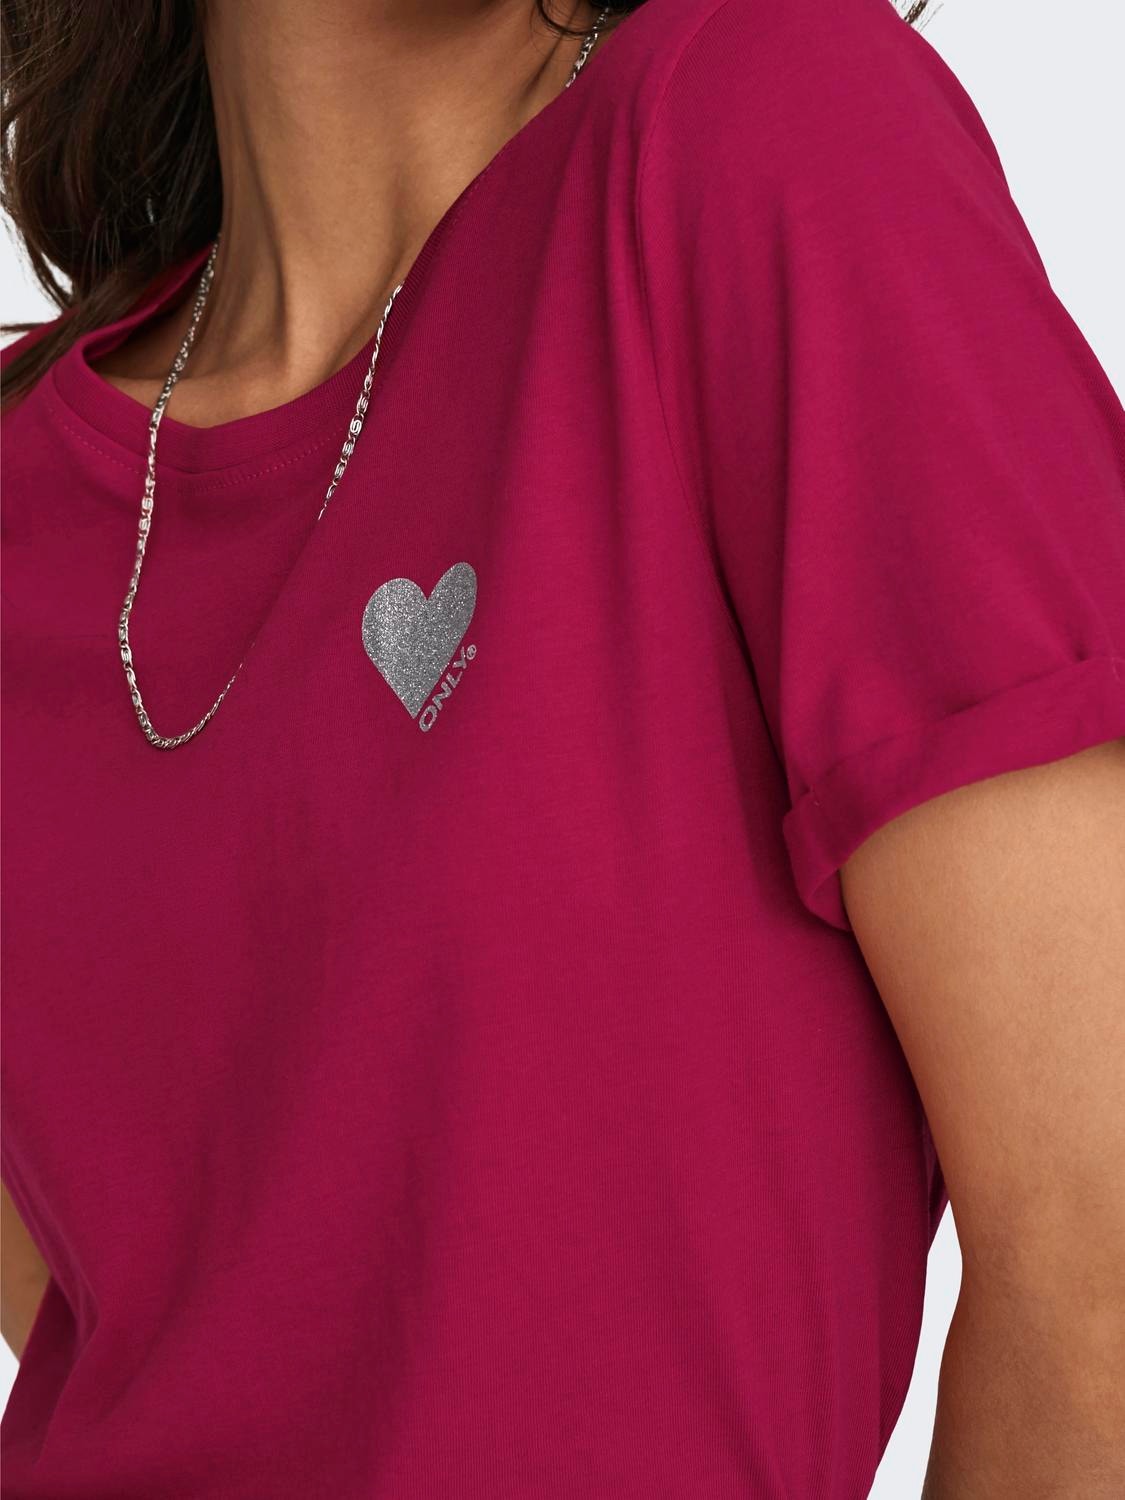 ONLY Regular Fit Round Neck T-Shirt -Cerise - 15244714